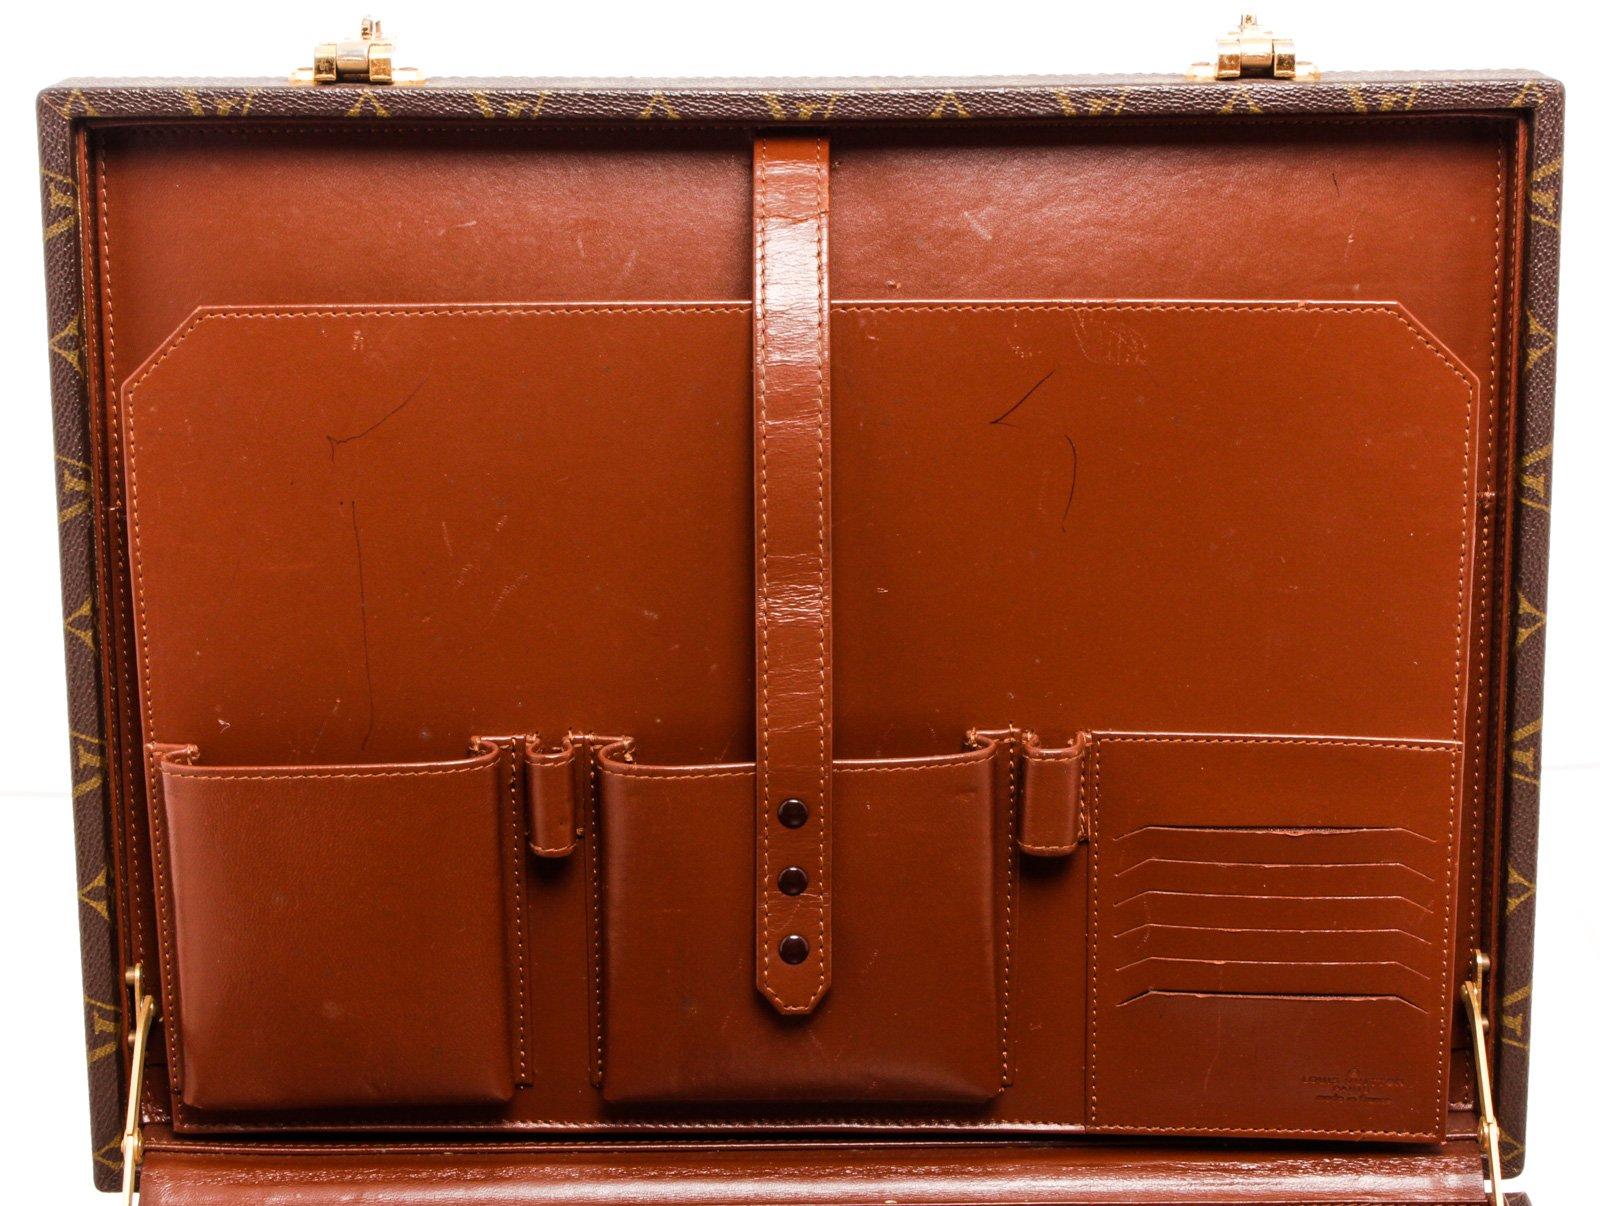 Louis Vuitton brown Monogram coated canvas President Briefcase with gold-tone hardware, brown leather interior, large back slip pocket, dual slip pockets, dual pen slots, and 6 card slots, push-lock closure.

25287MSC